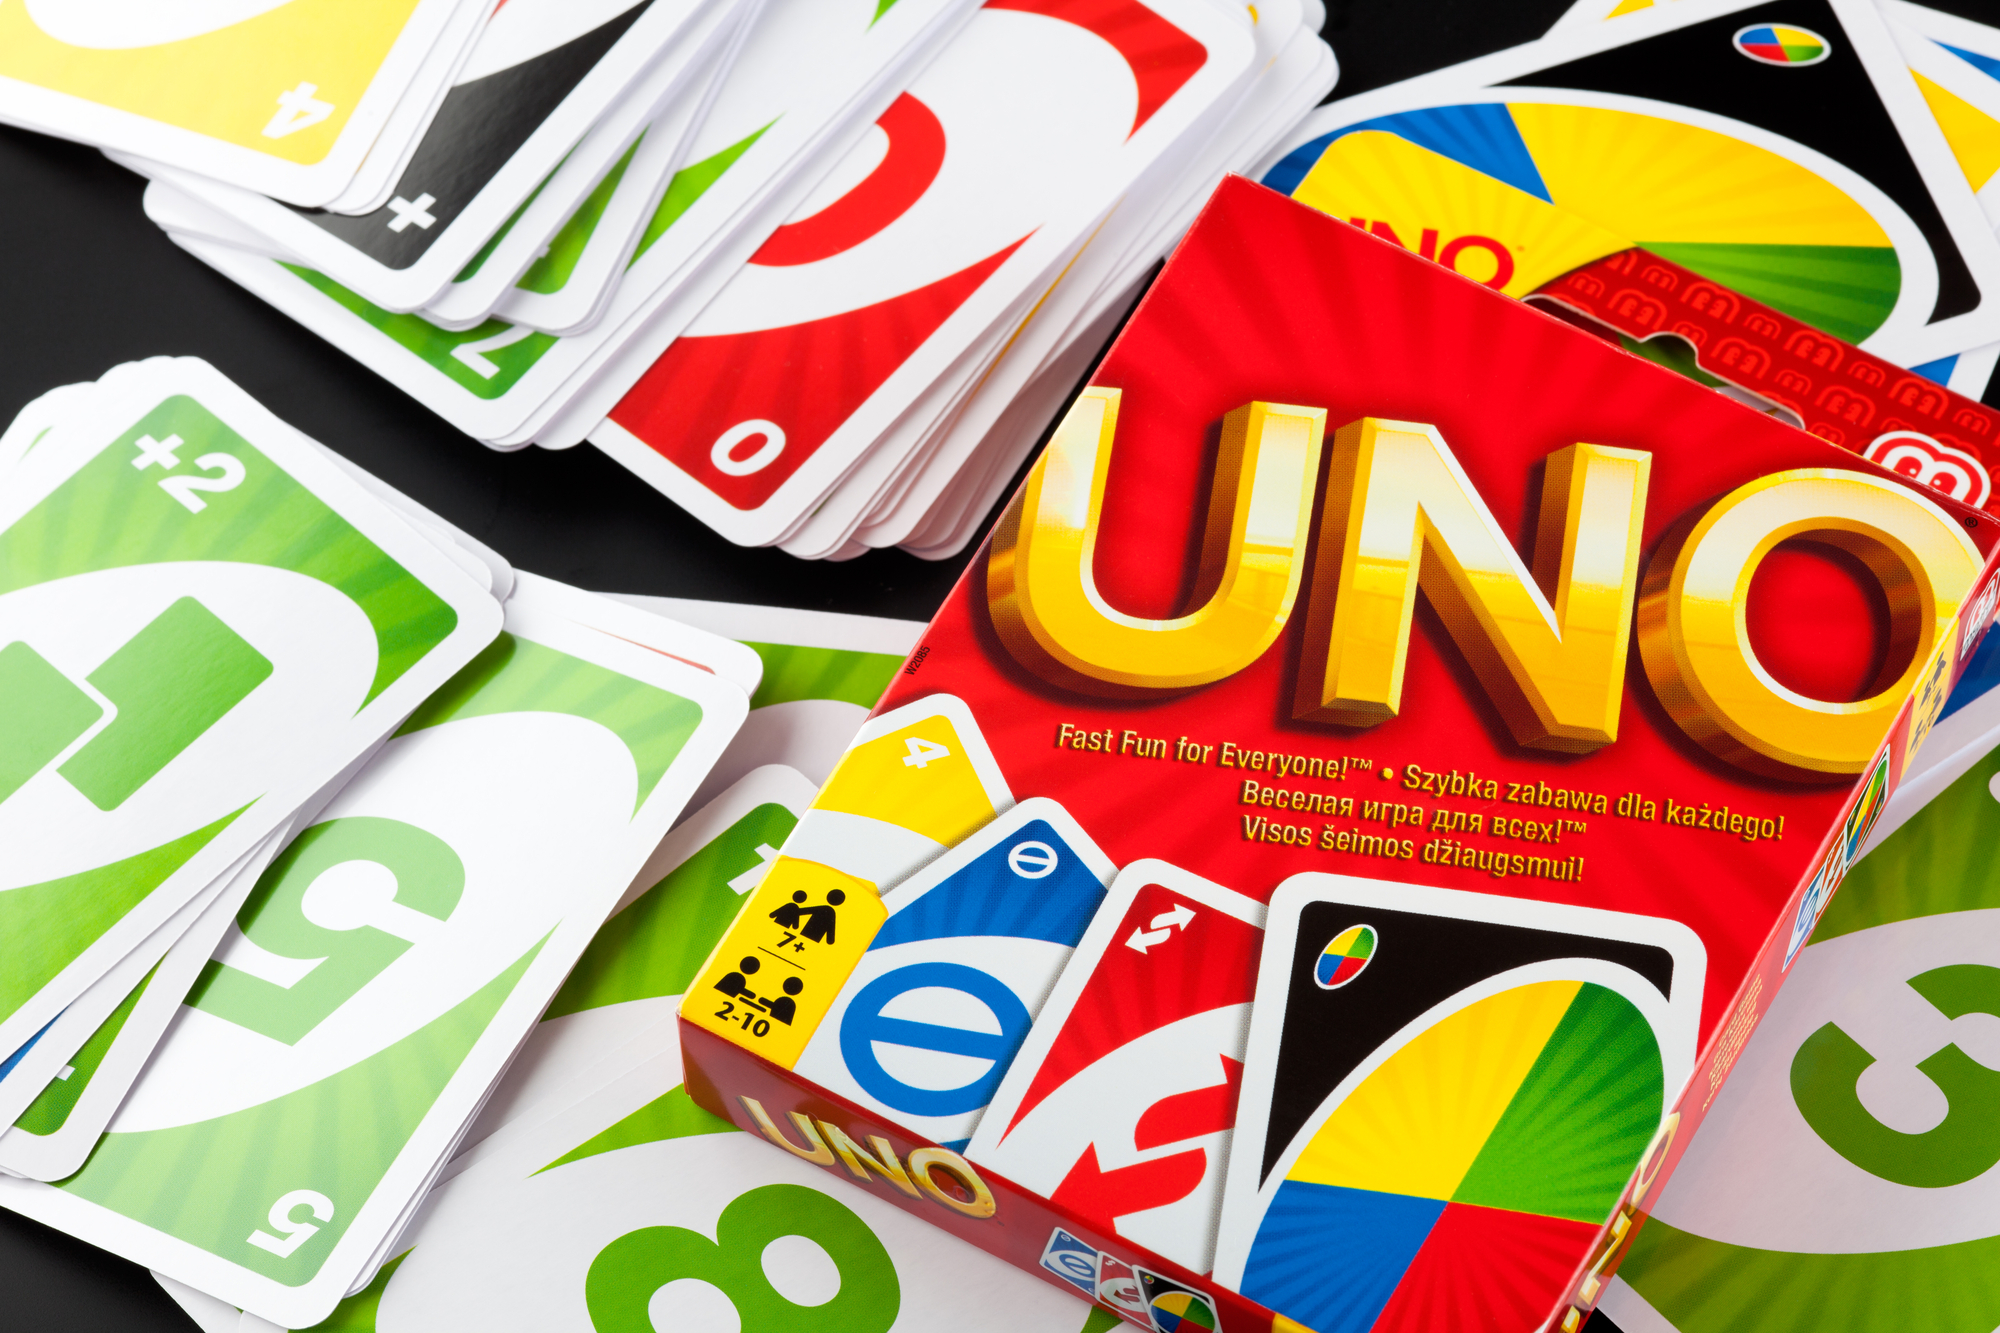 Drunk Uno: How To Play Uno Drinking Card Games [+Rules]